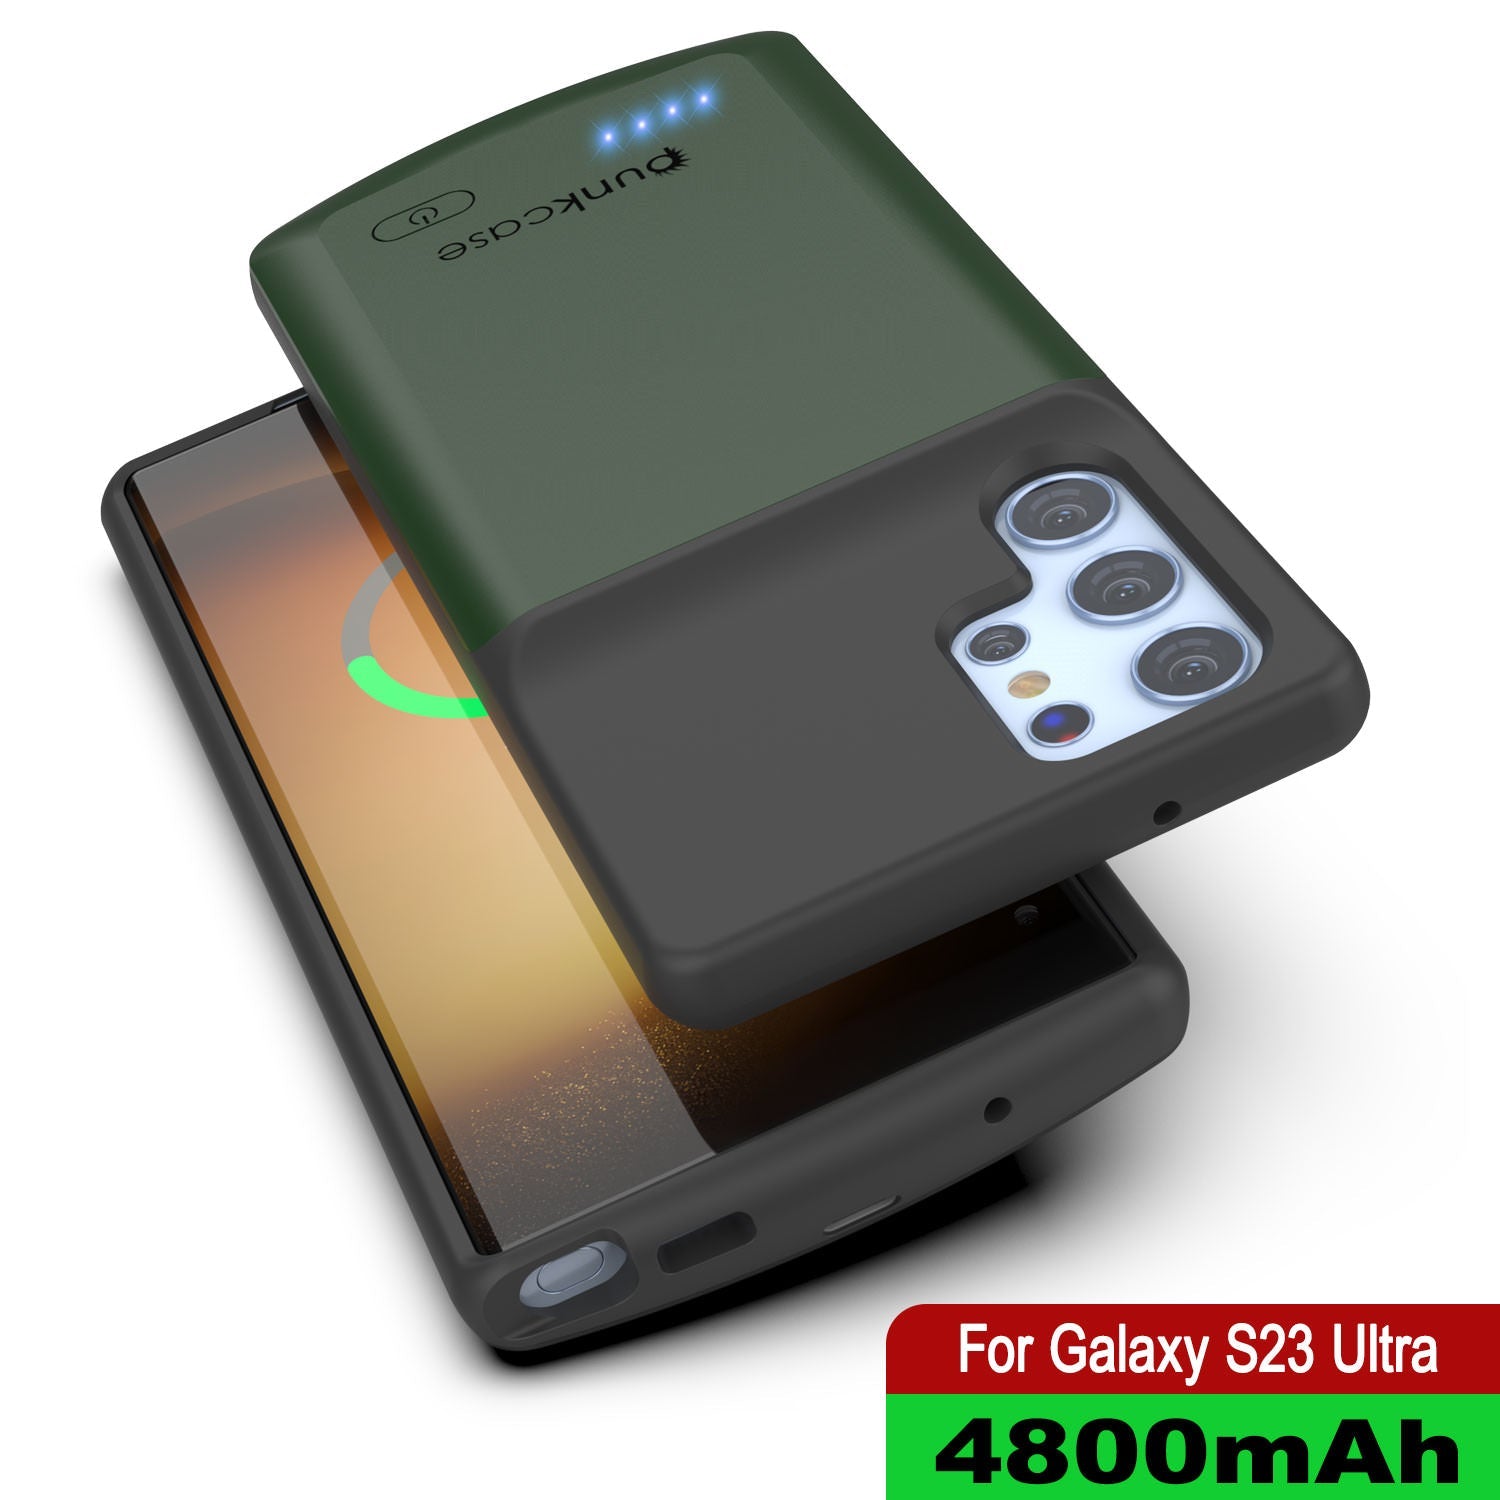 PunkJuice S23 Ultra Battery Case Green - Portable Charging Power Juice Bank with 4800mAh